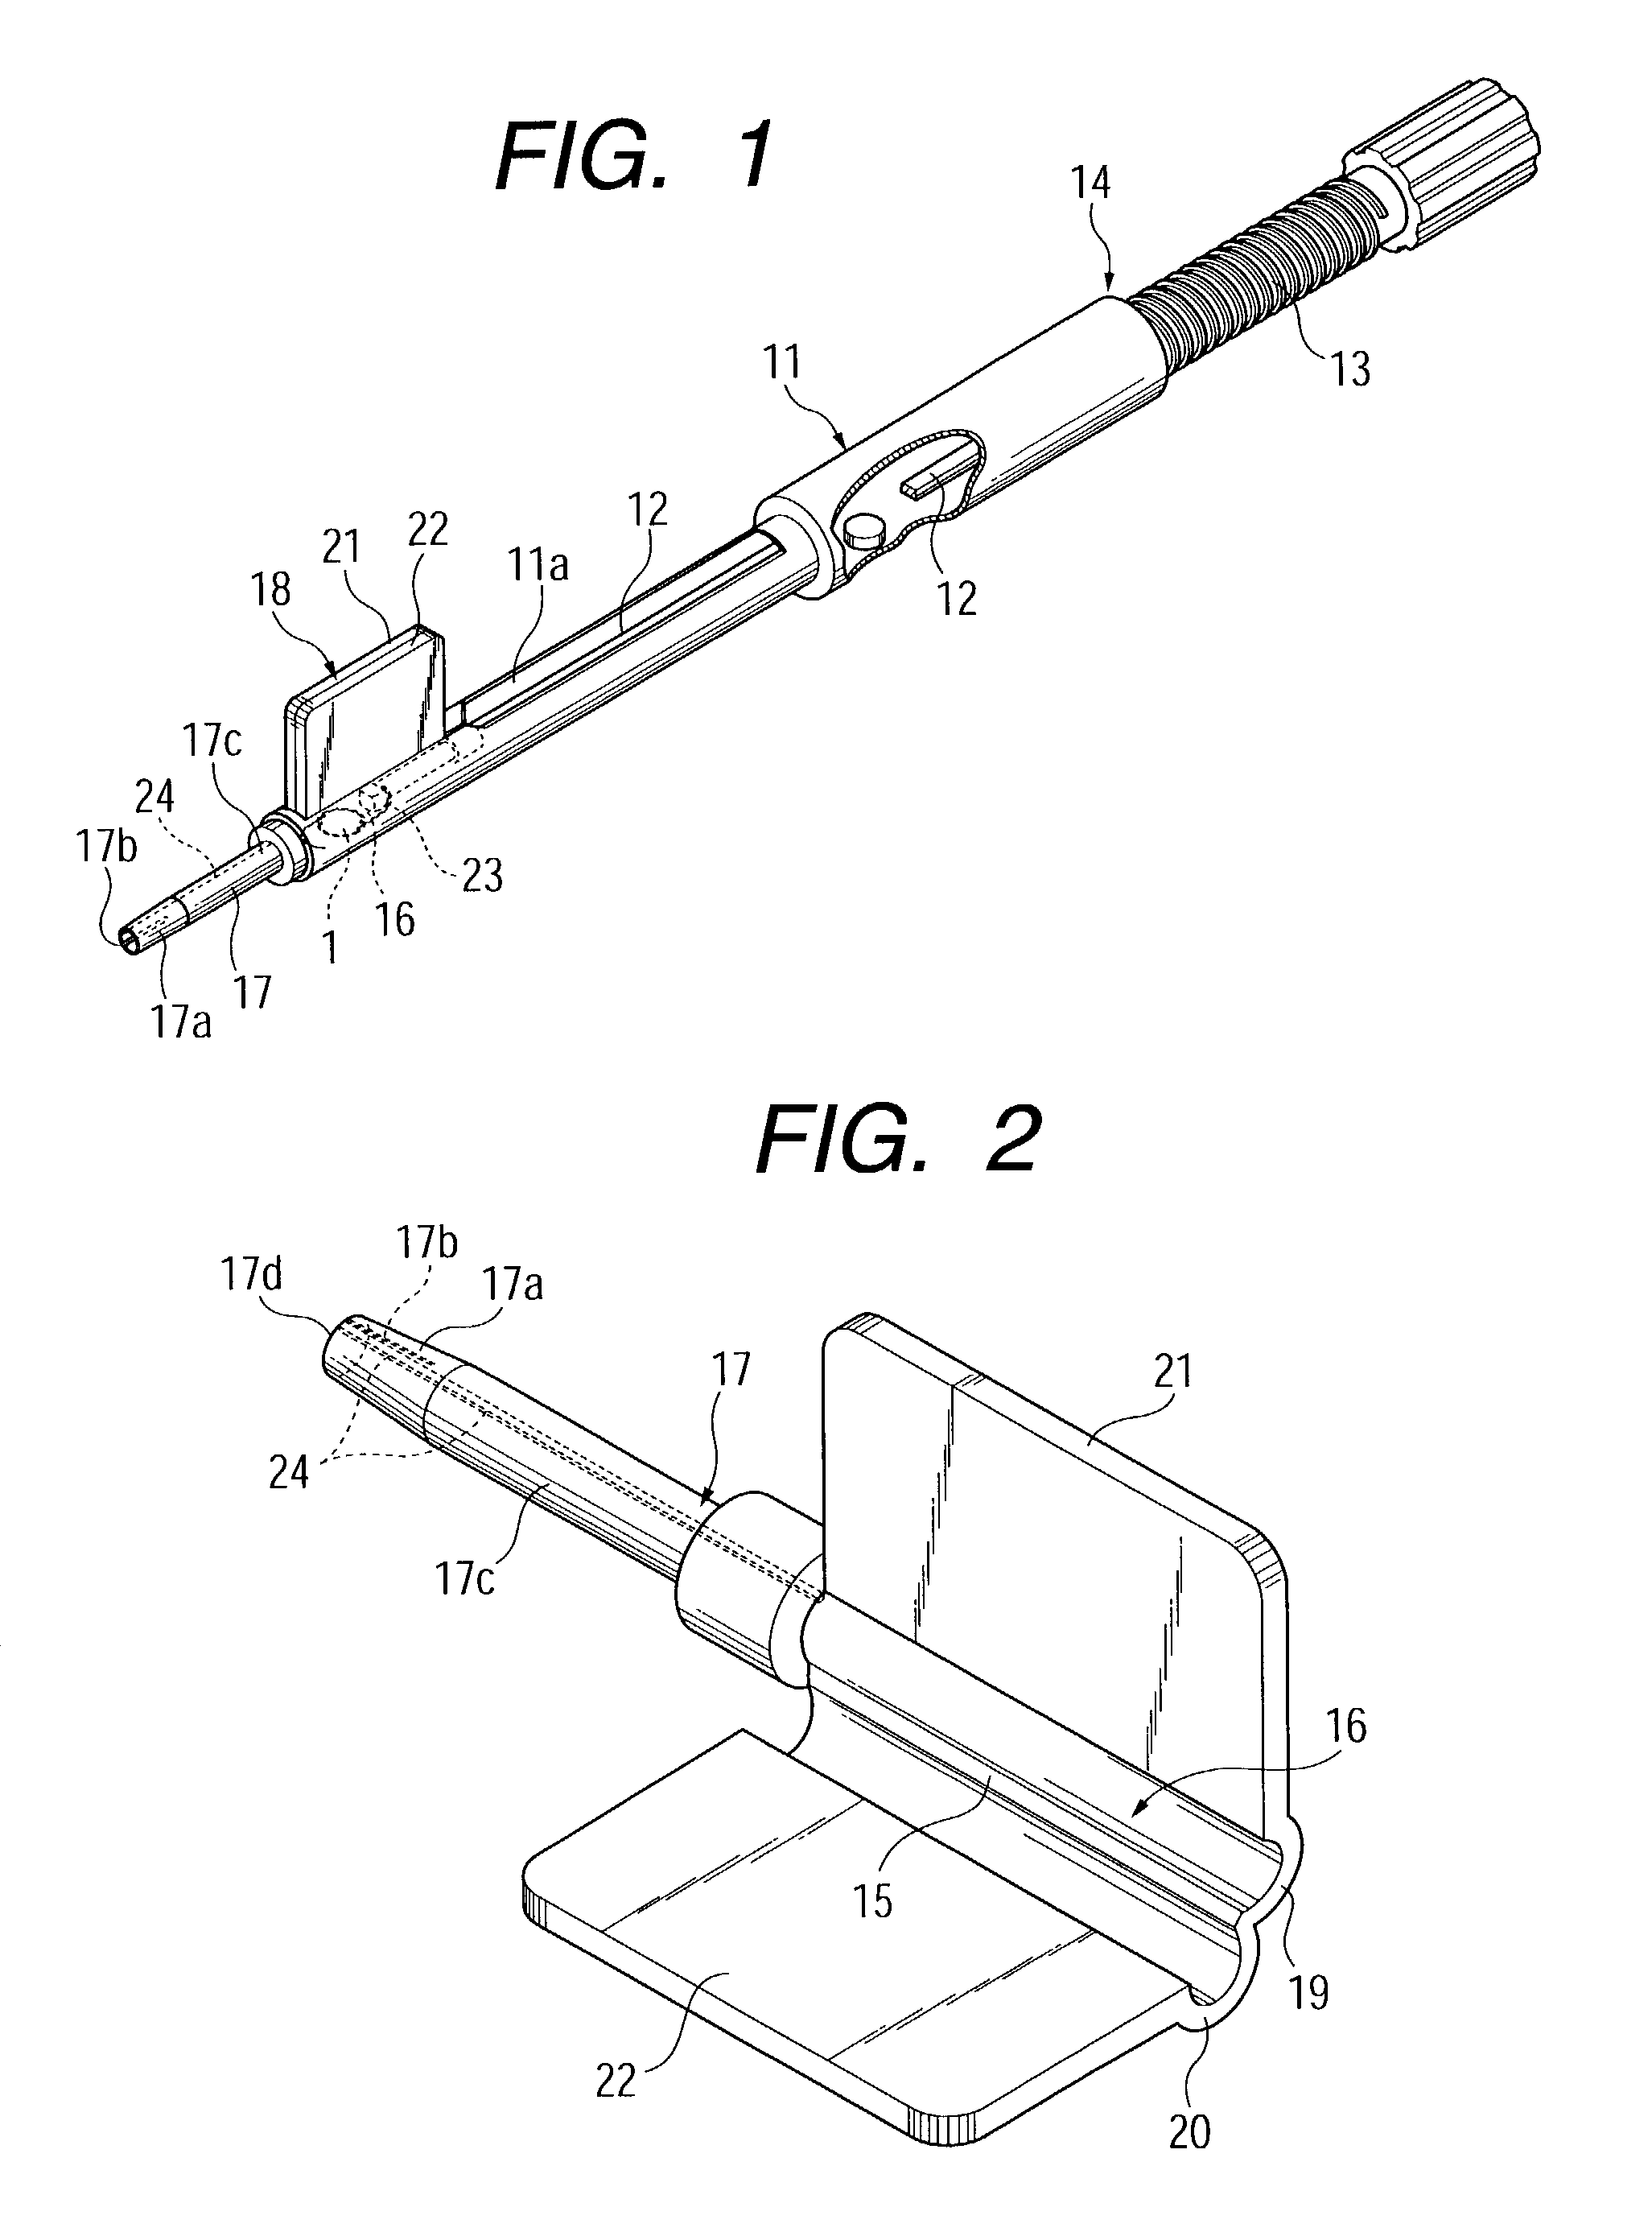 Insertion device for deformable intraocular lens